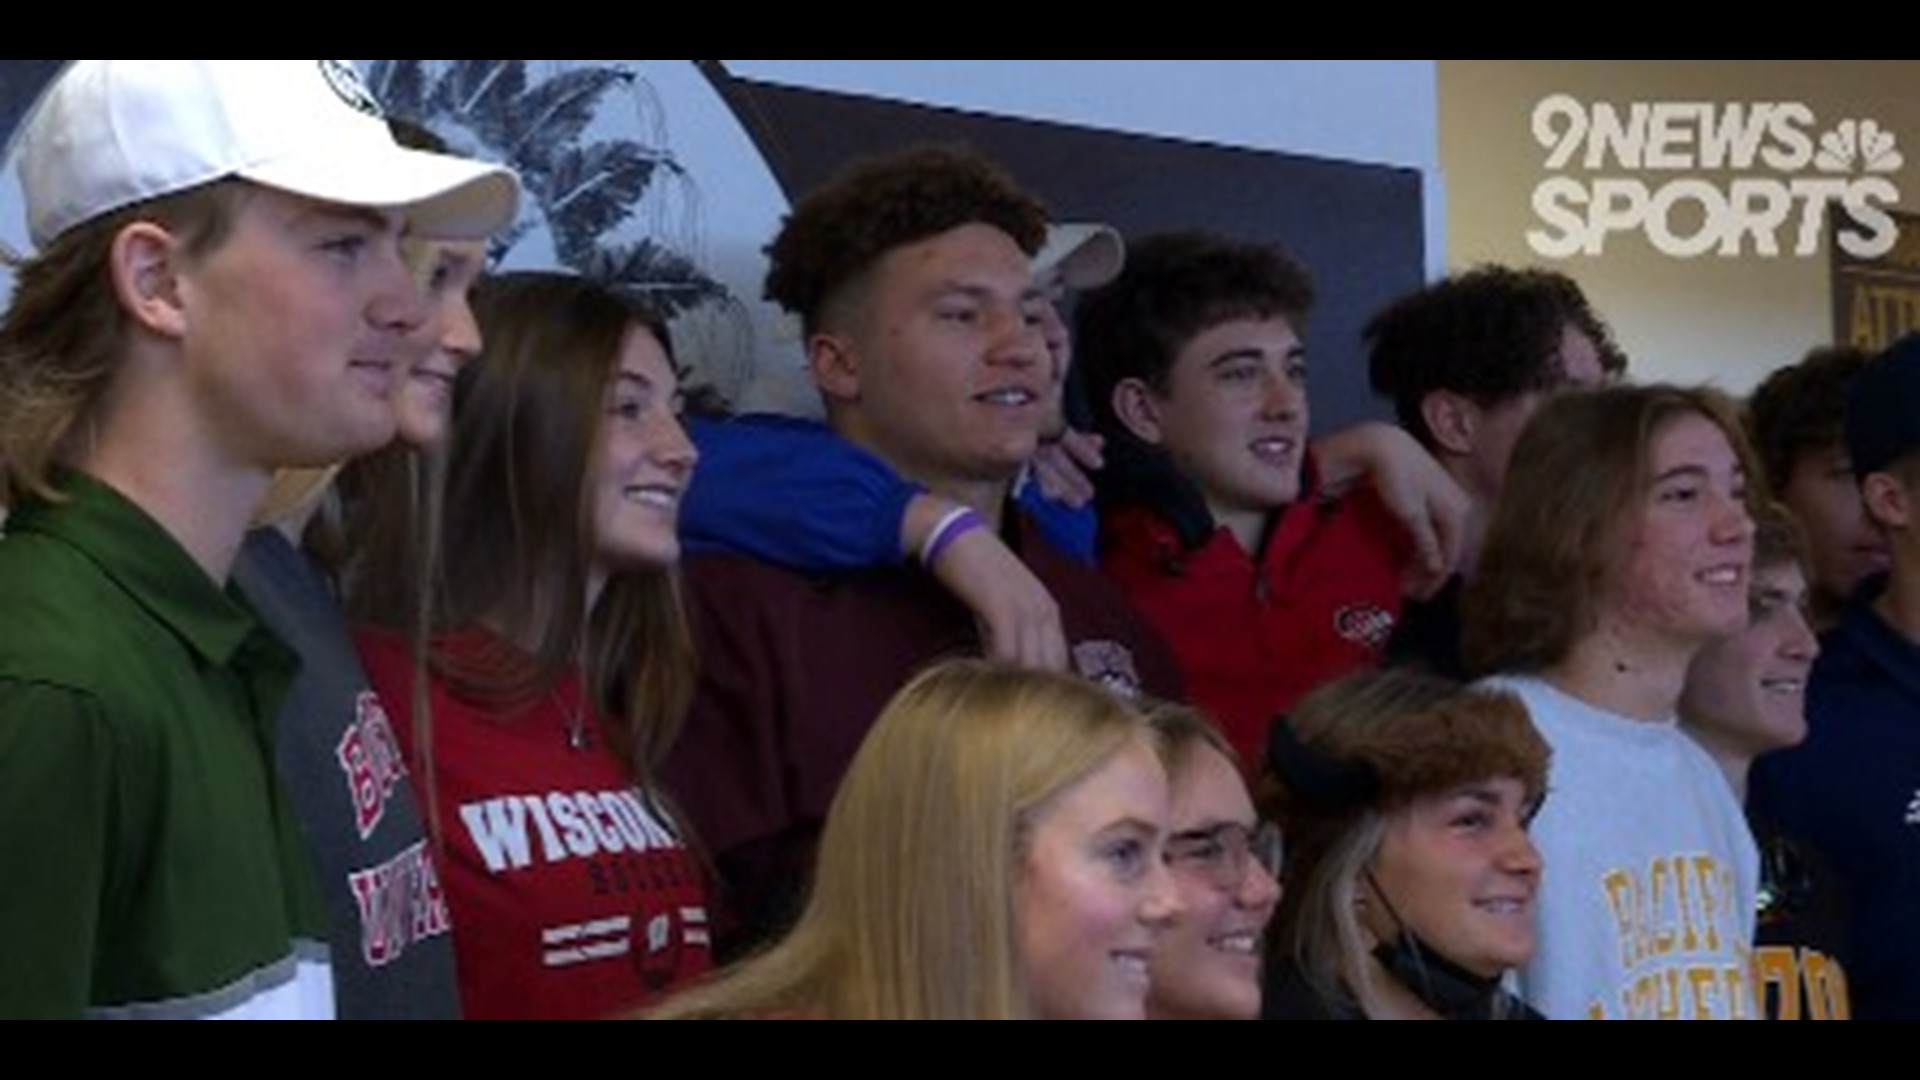 After signing day celebrations got pushed back due to snow, local athletes signed their letters of intent